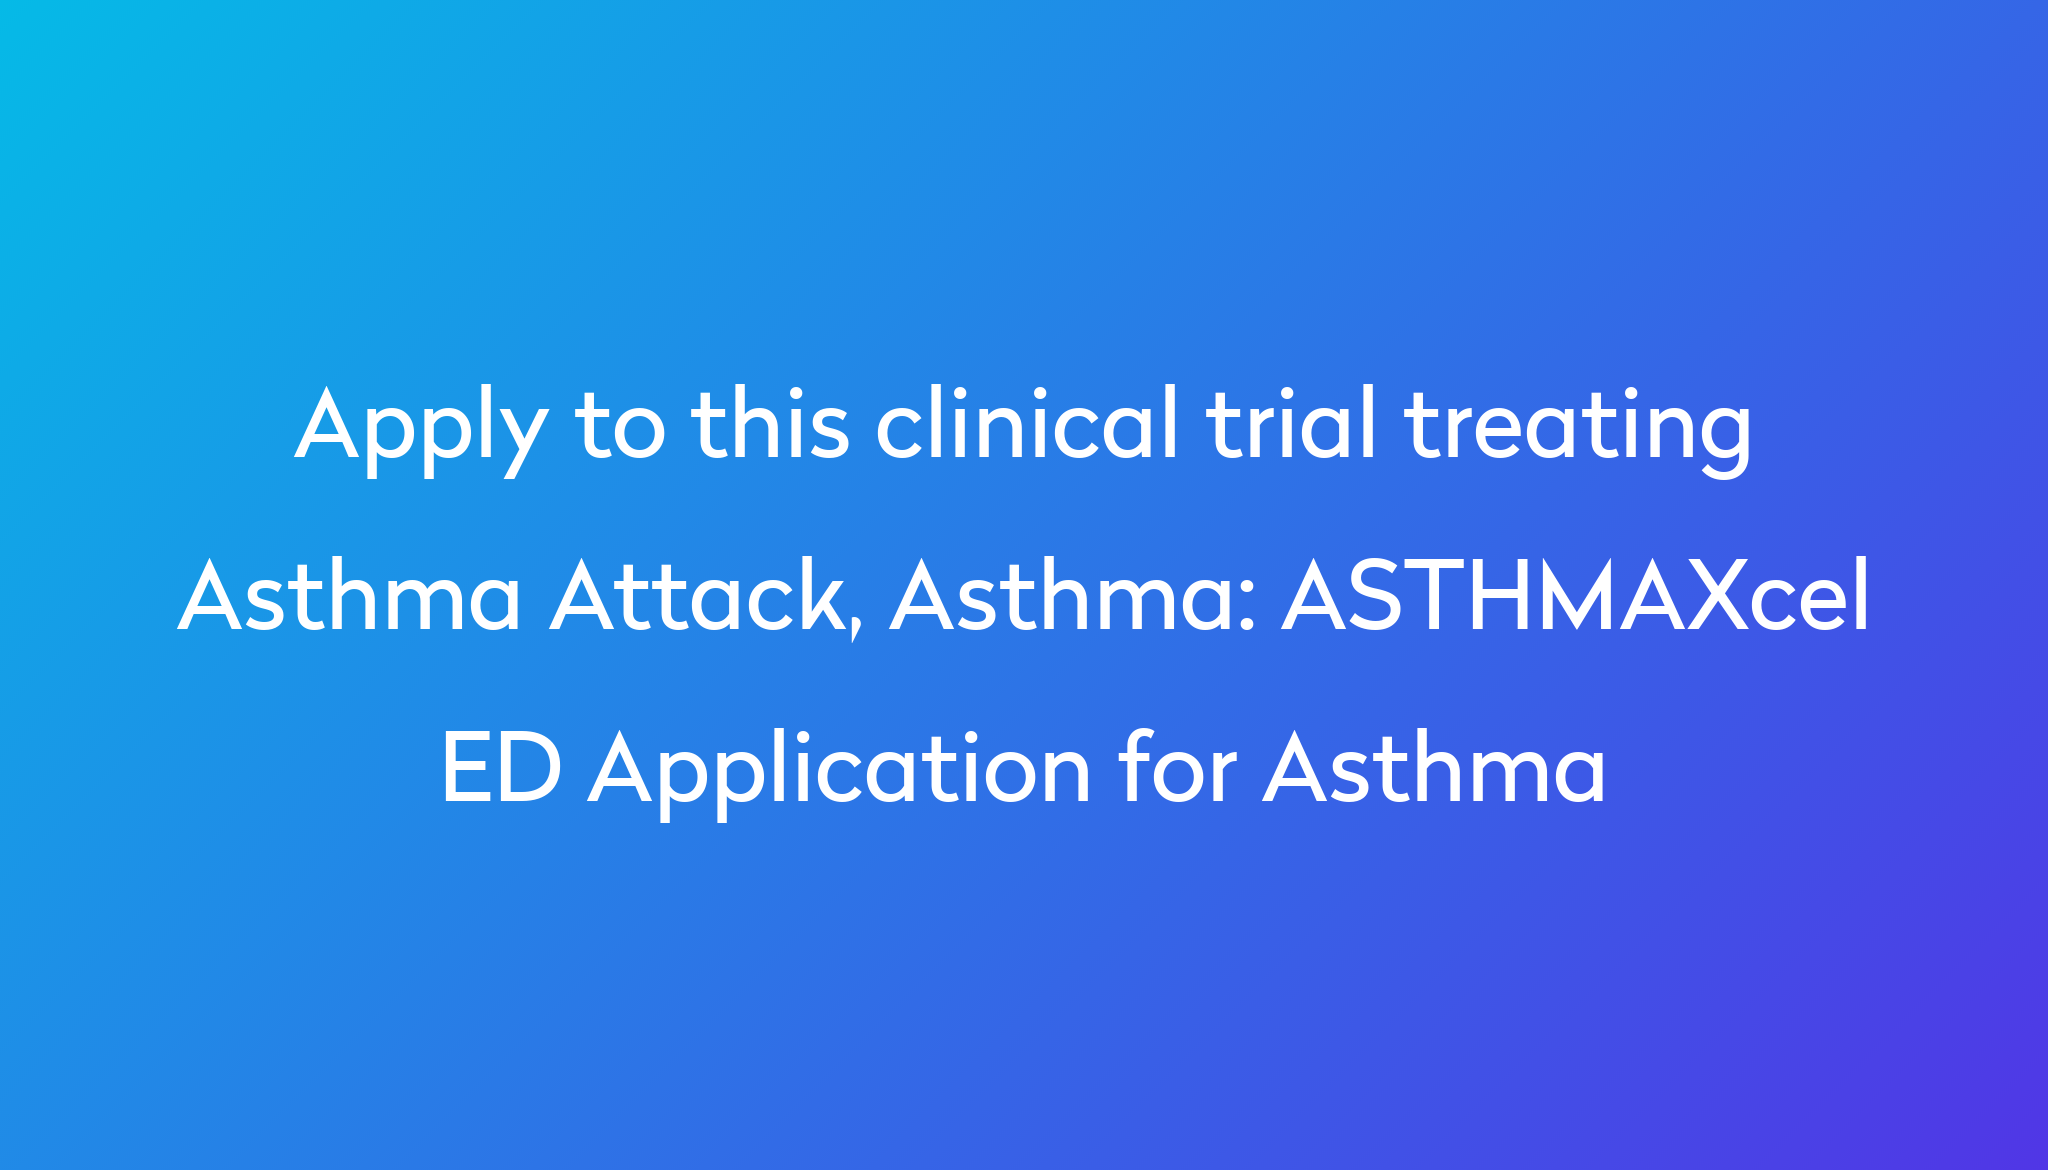 asthmaxcel-ed-application-for-asthma-clinical-trial-2024-power